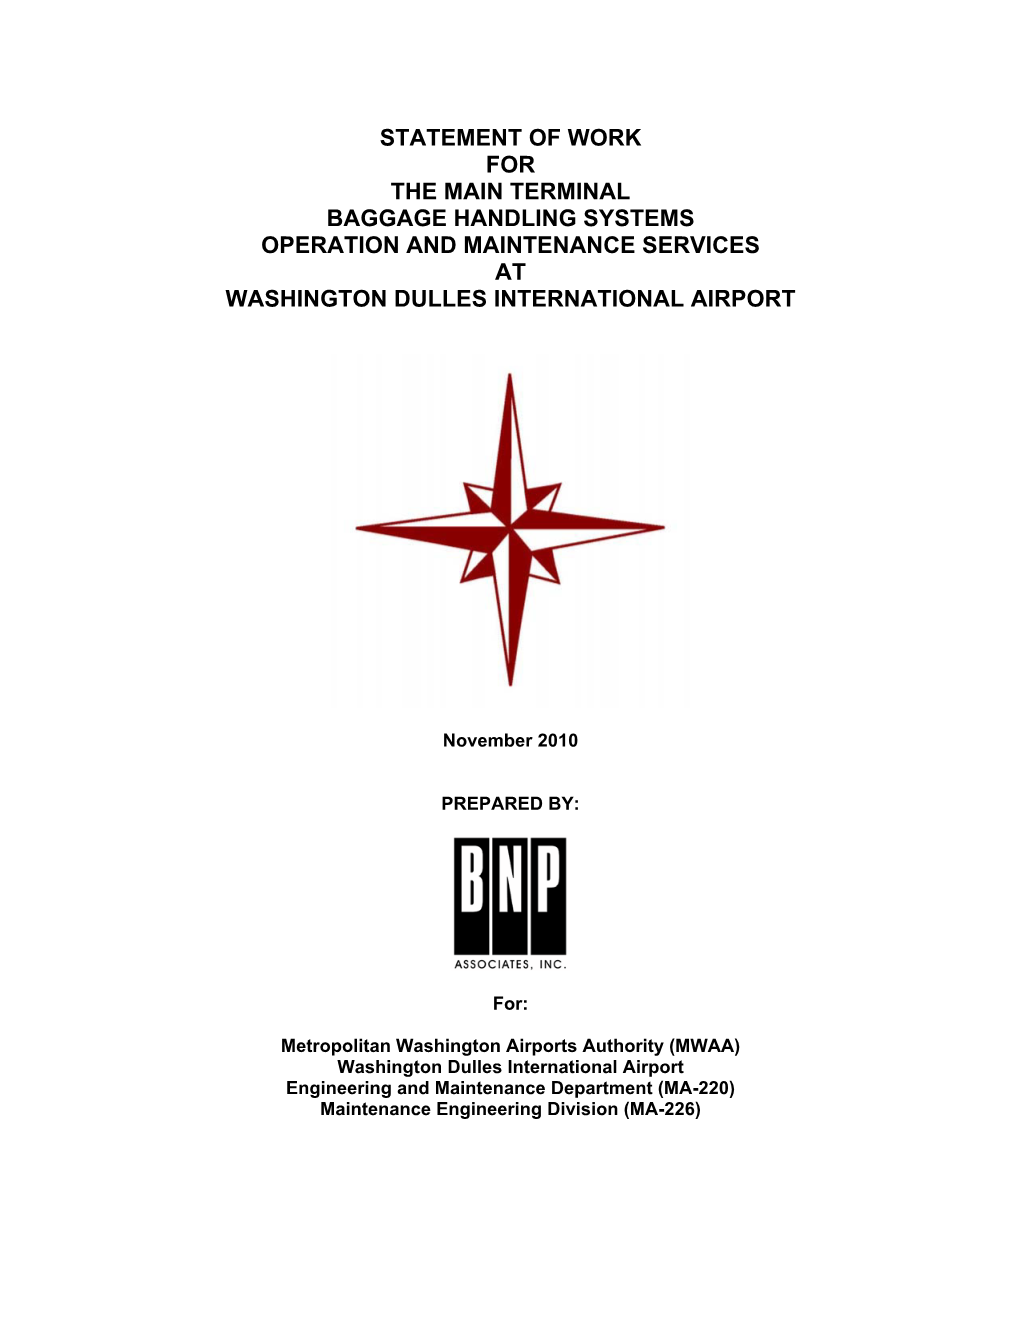 Statement of Work for the Main Terminal Baggage Handling Systems Operation and Maintenance Services at Washington Dulles International Airport